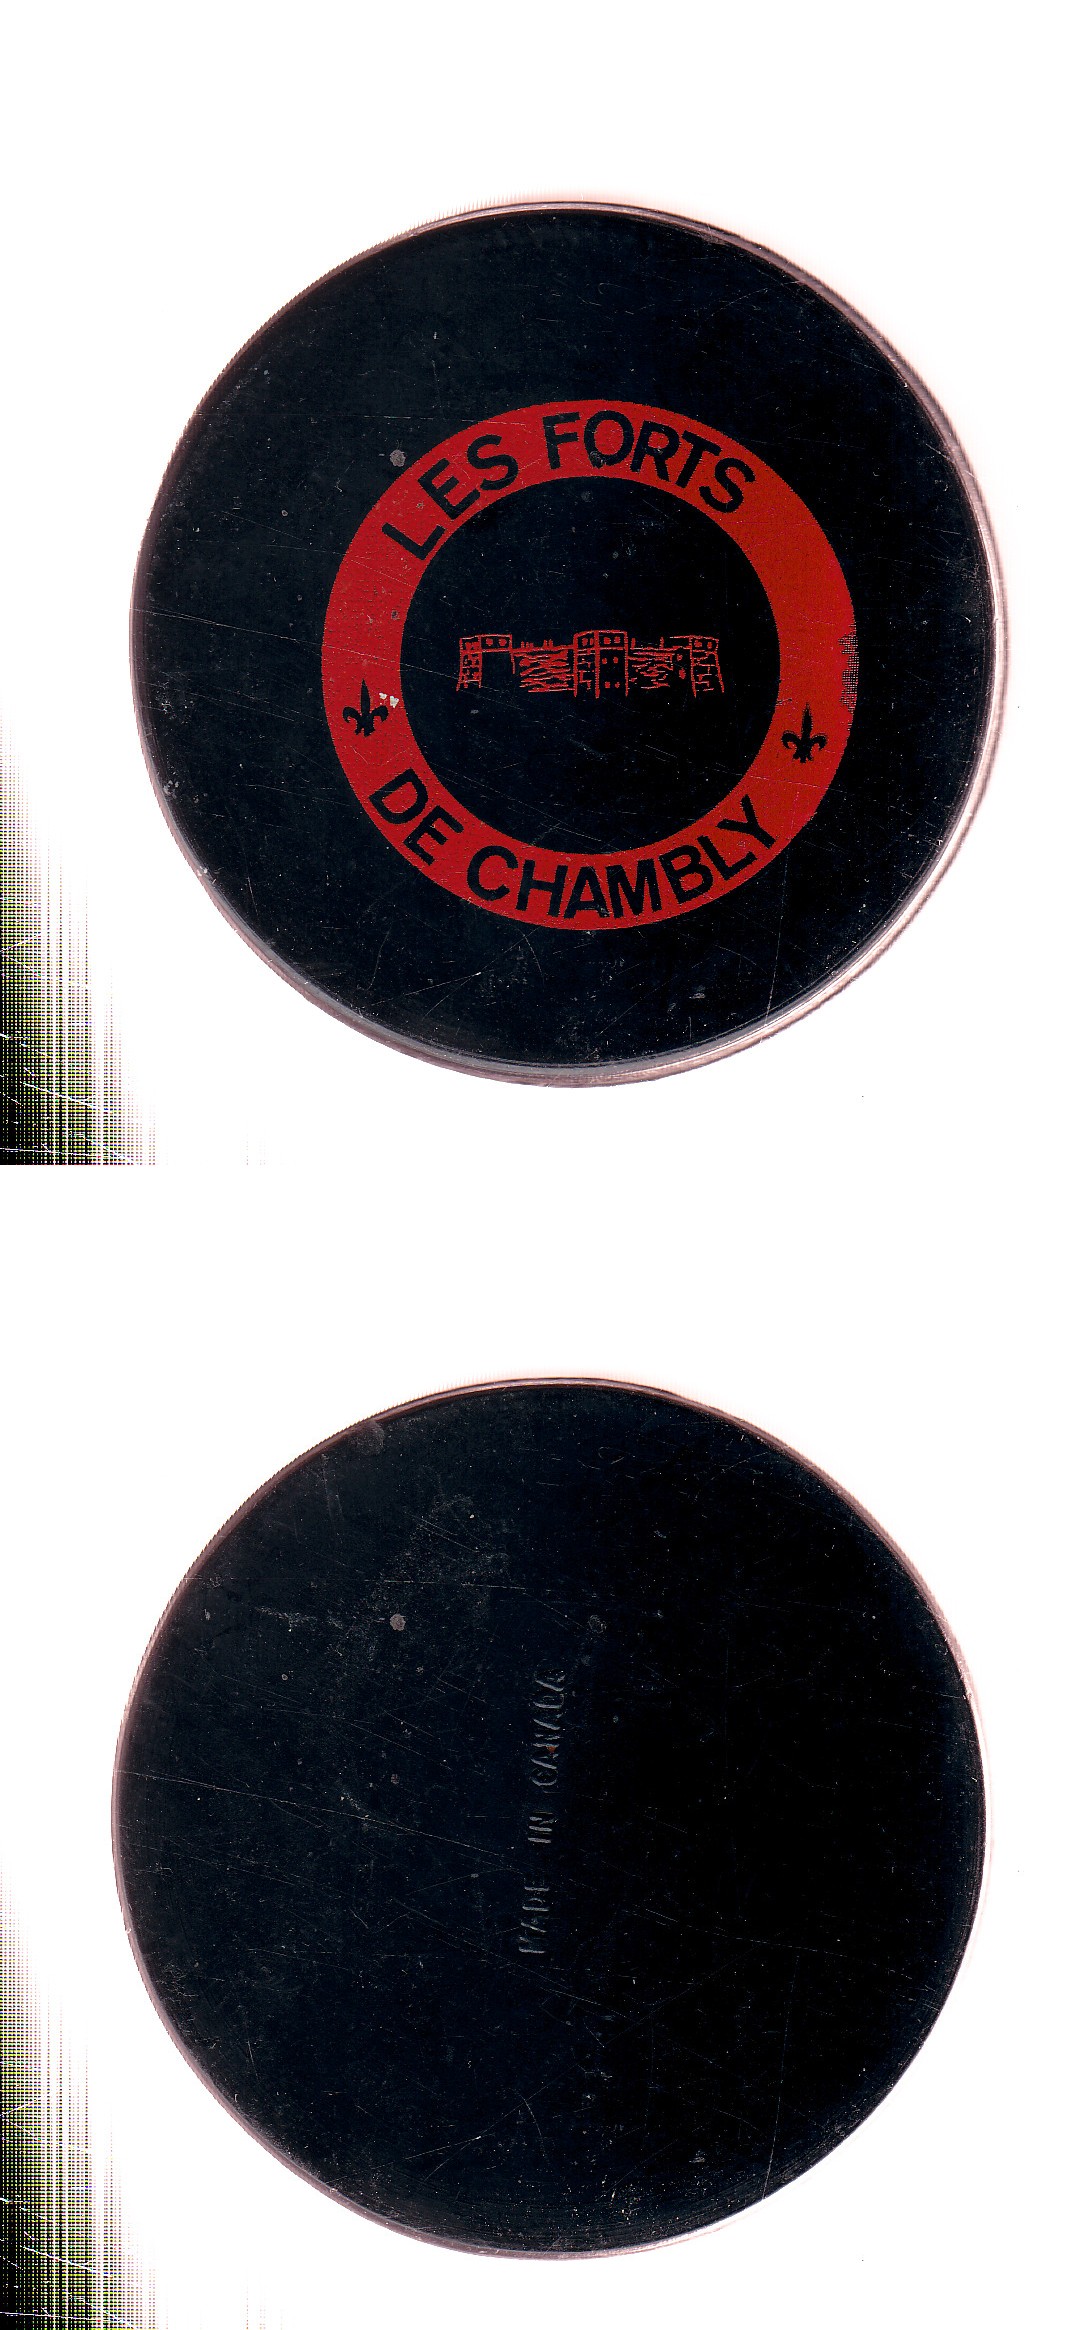 1970-74 BILTRITE CHAMBLY FORTS GAME PUCK photo